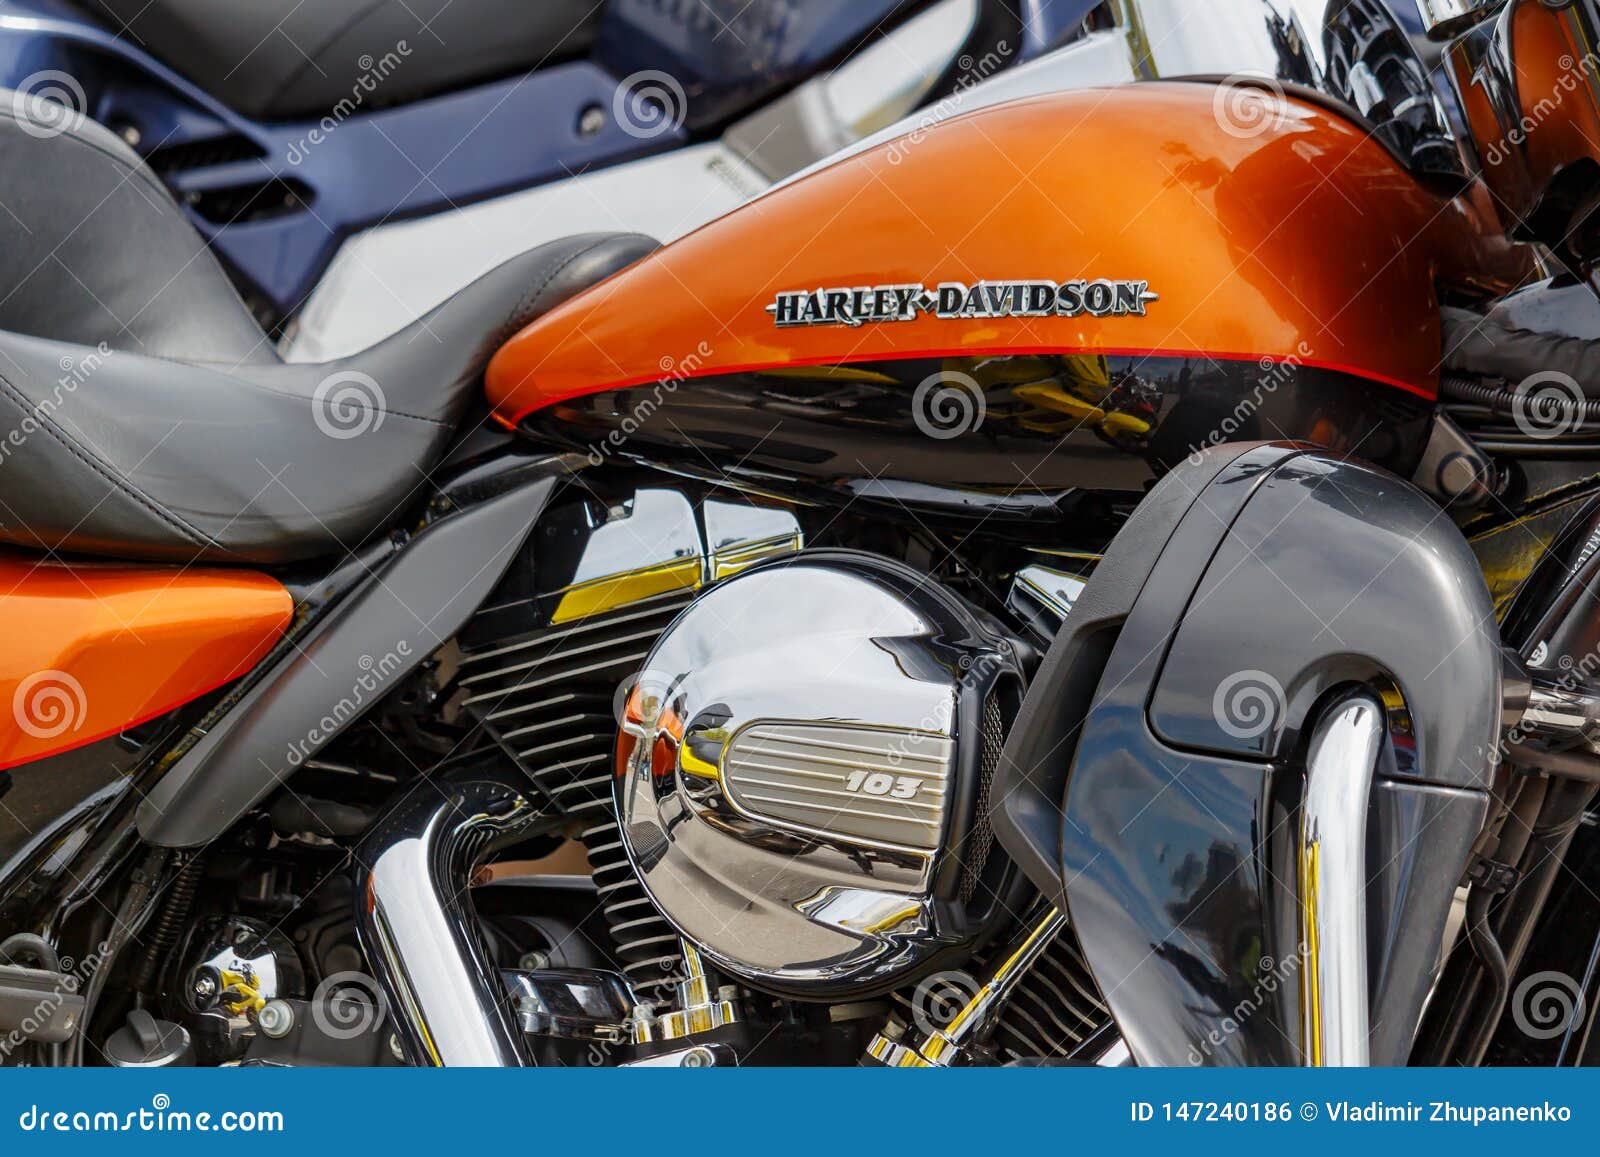 Moscow Russia May 04 2019 Bright Orange Fuel Tank With Emblem Of Harley Davidson Motorcycles And Chrome Engine Closeup Moto Editorial Photo Image Of Leather Metal 147240186